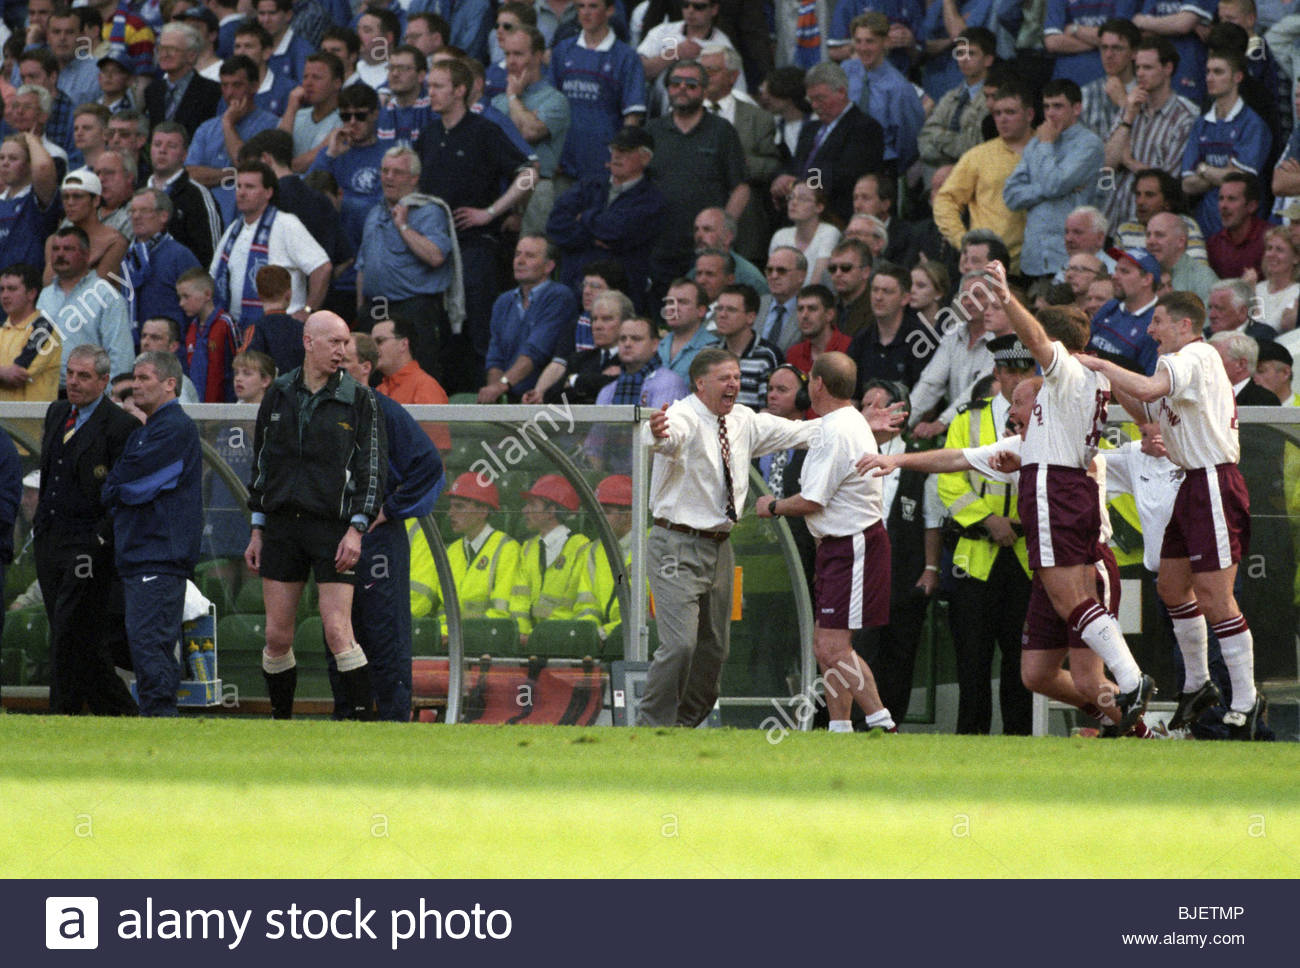 Image result for hearts 2 rangers 1 scottish cup final